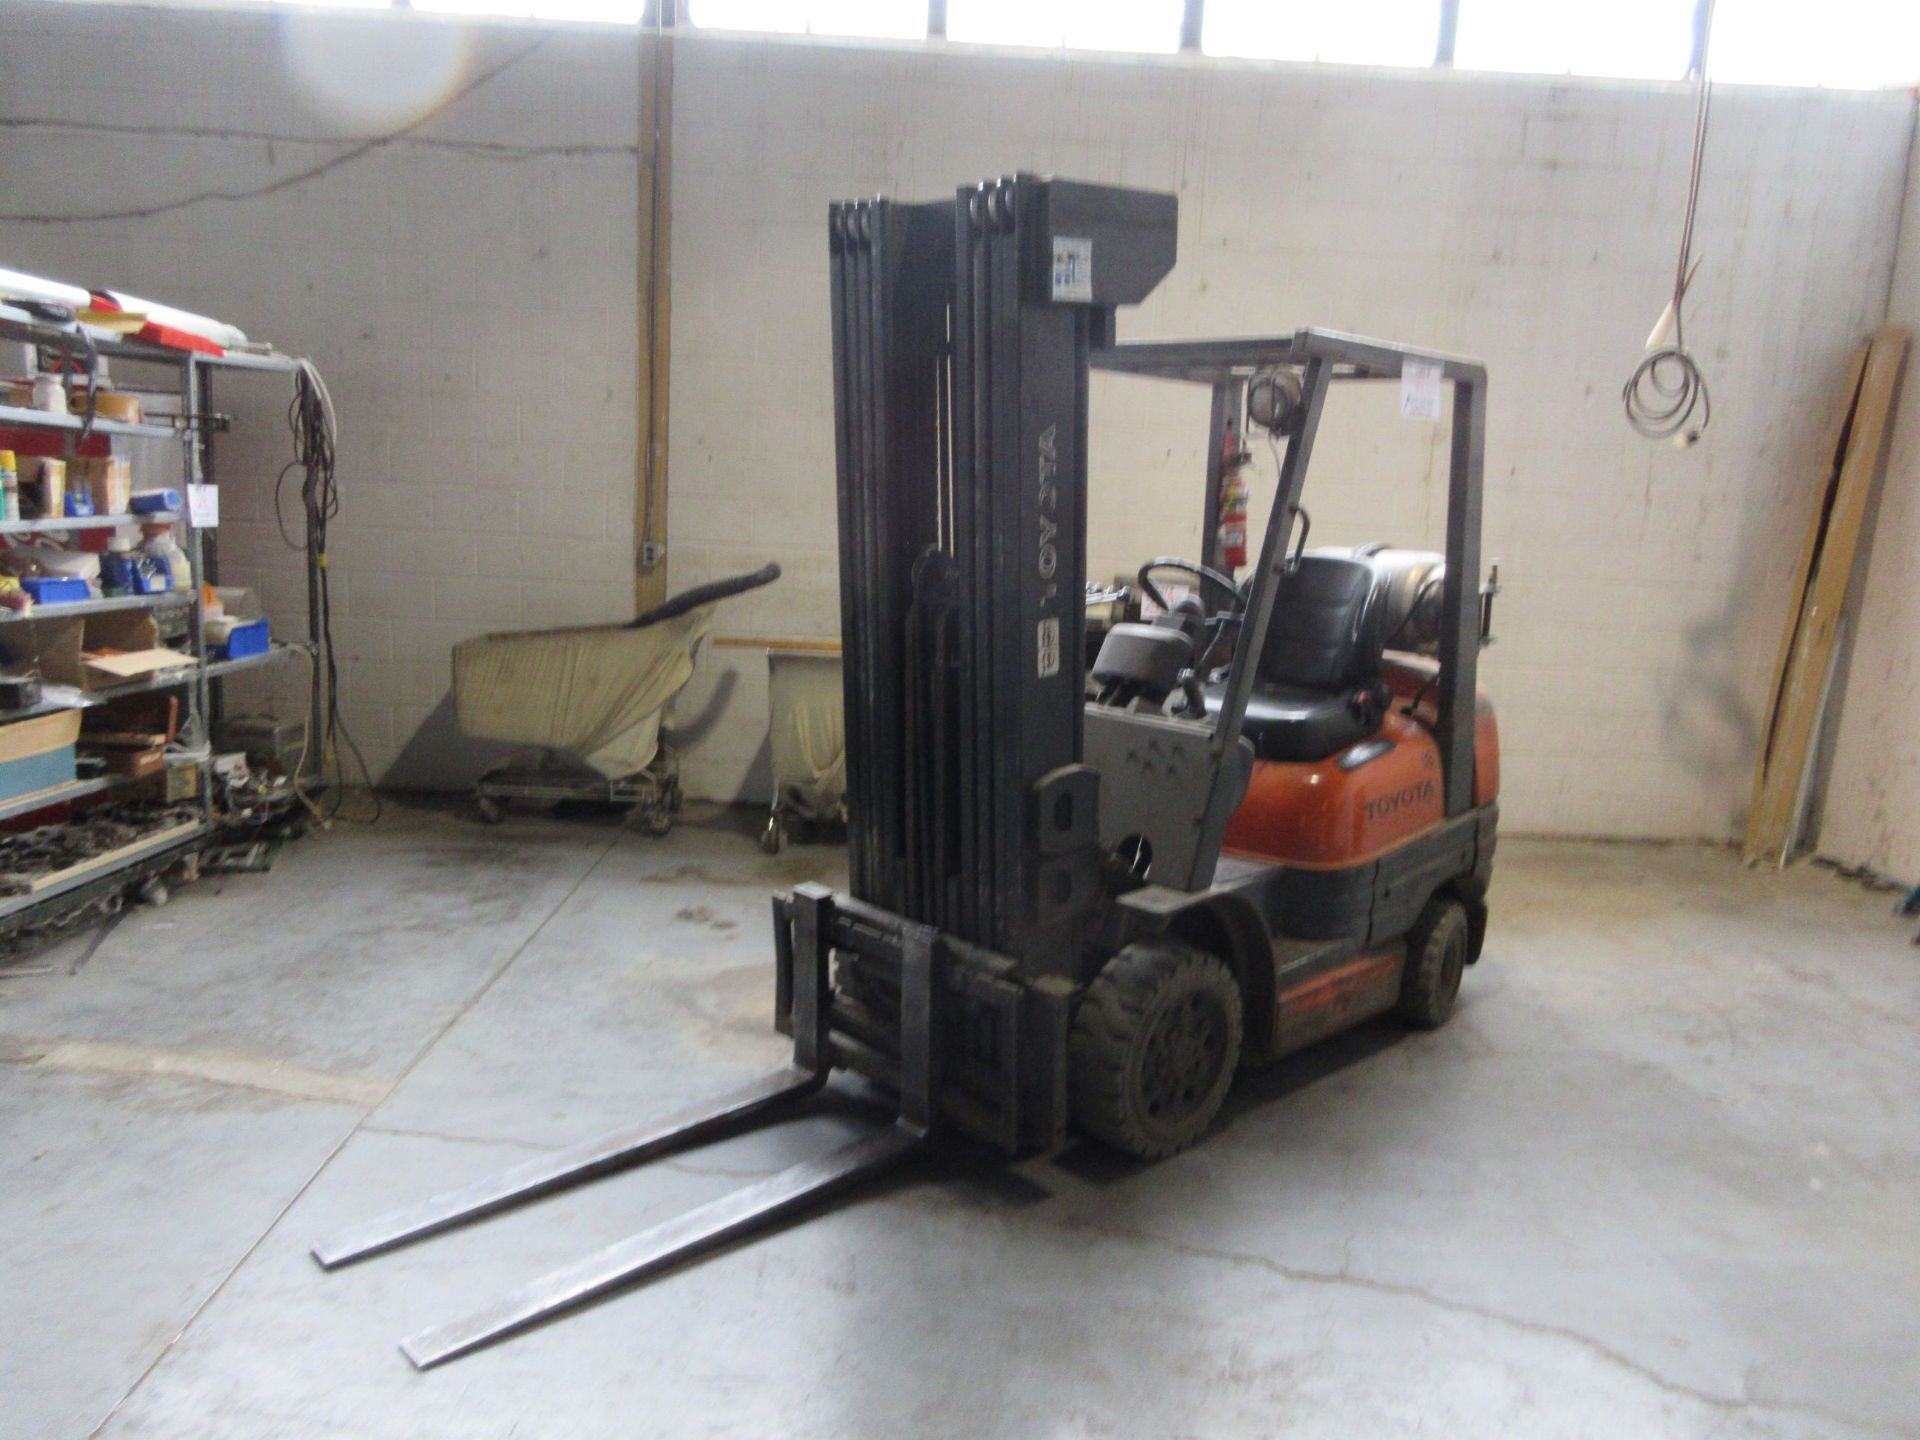 TOYOTA propane fork lift- Capacity 5,000 lbs (3 sections)- Model : 42-6FGCU25 - Lift height 189", - Image 2 of 7